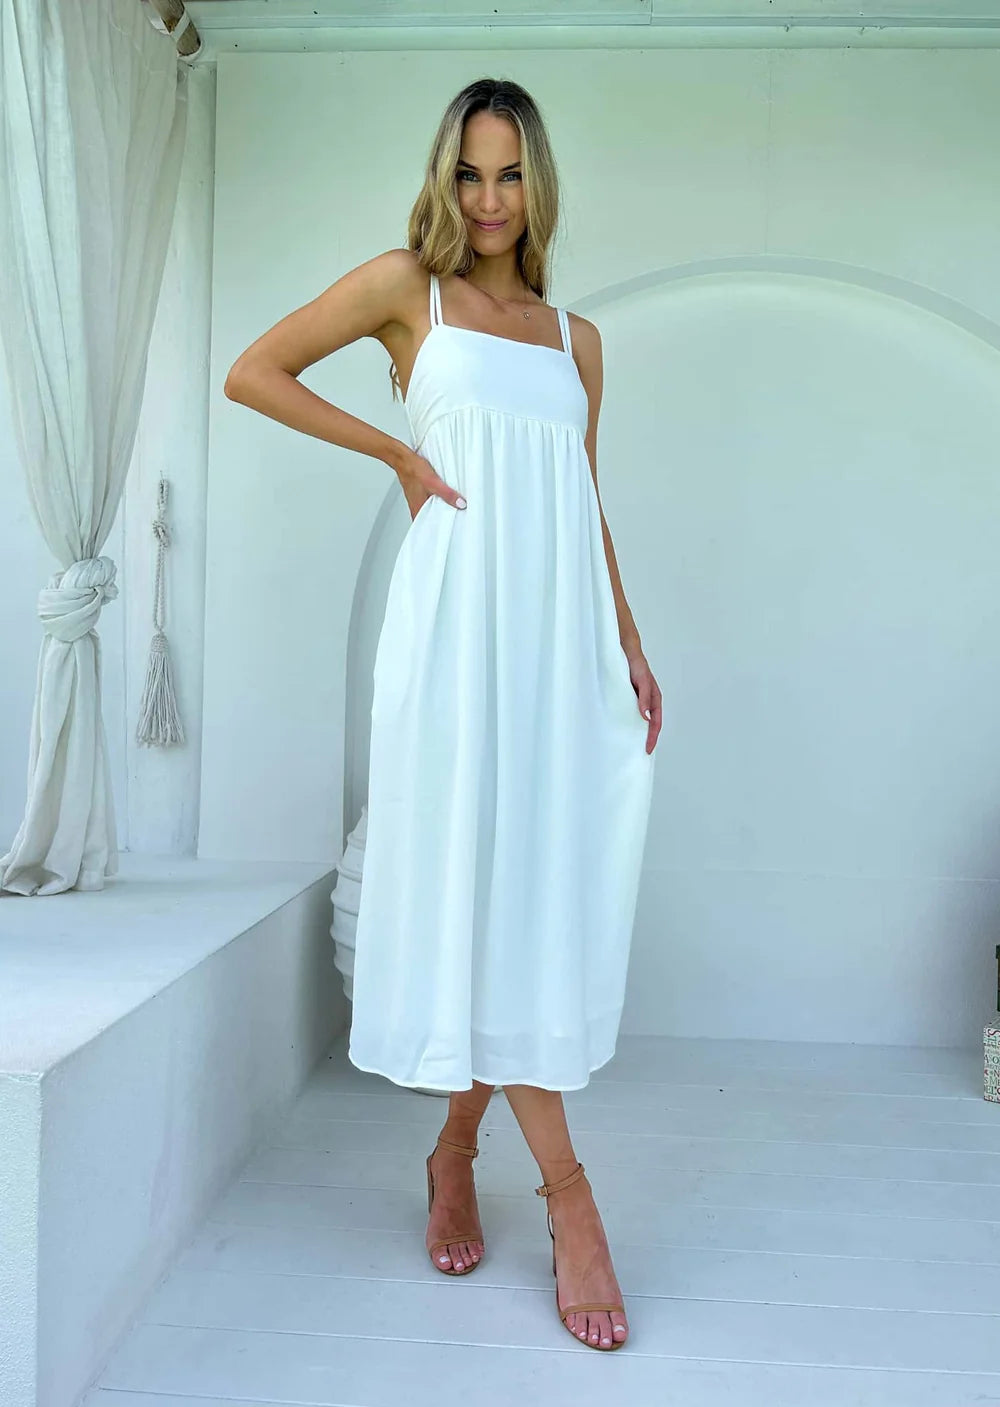 The Annie Dress looks cute and stays comfy! The adjustable straps and double strap feature allow you to customize your look. The maxi length and elasticated back provide you with an effortless fit, while the lined design ensures maximum comfort. Wear it your way and look fabulous!